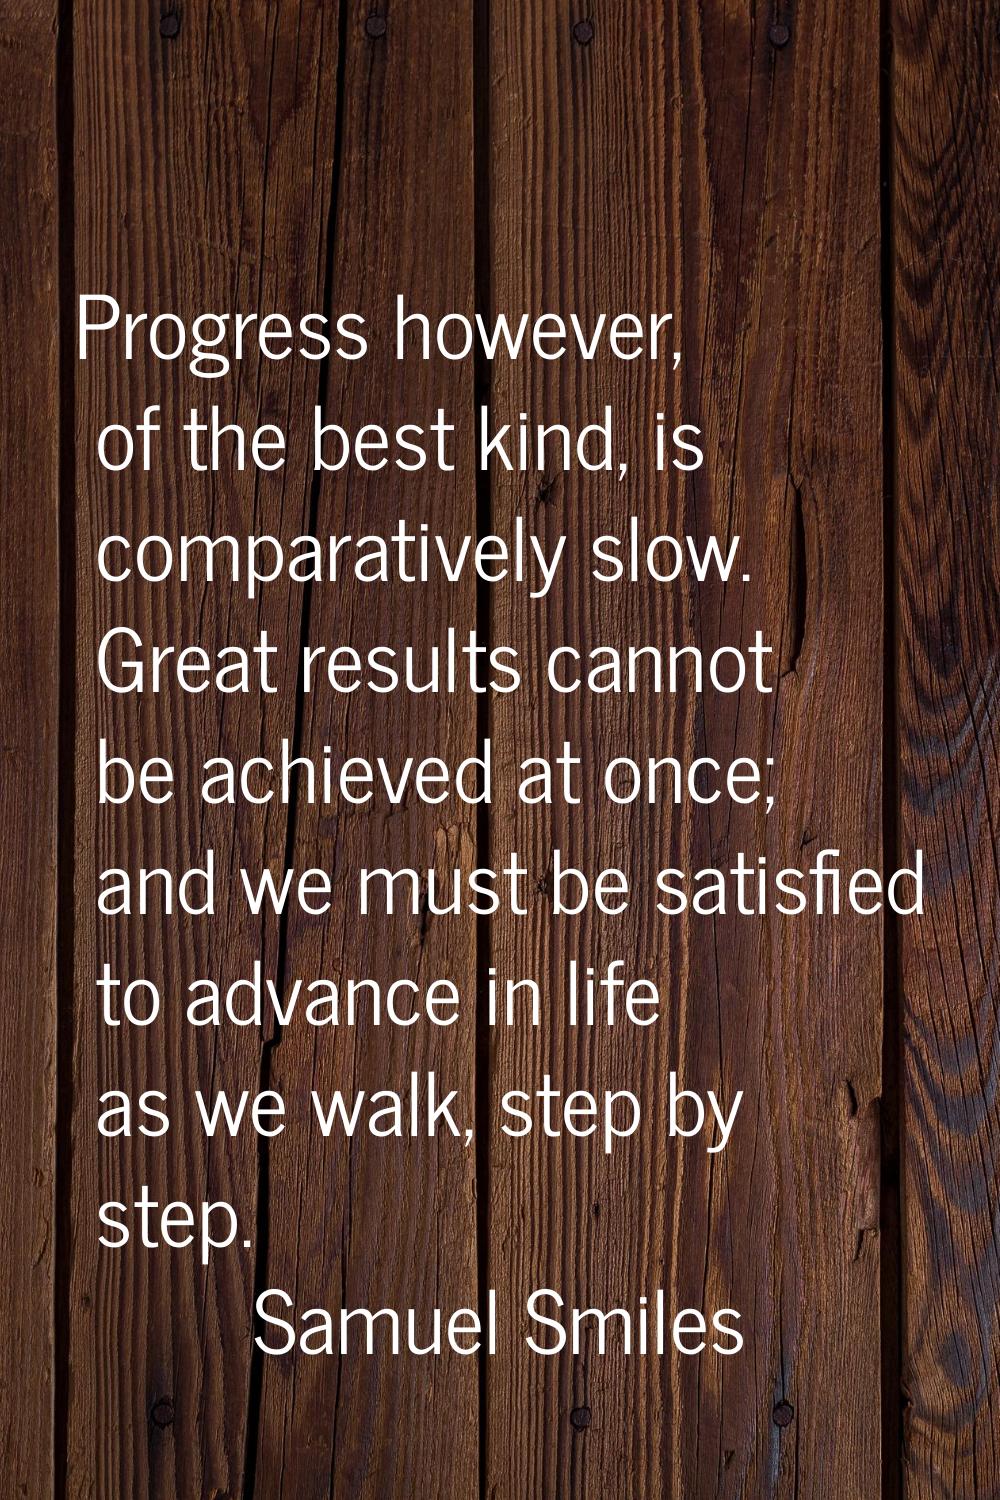 Progress however, of the best kind, is comparatively slow. Great results cannot be achieved at once